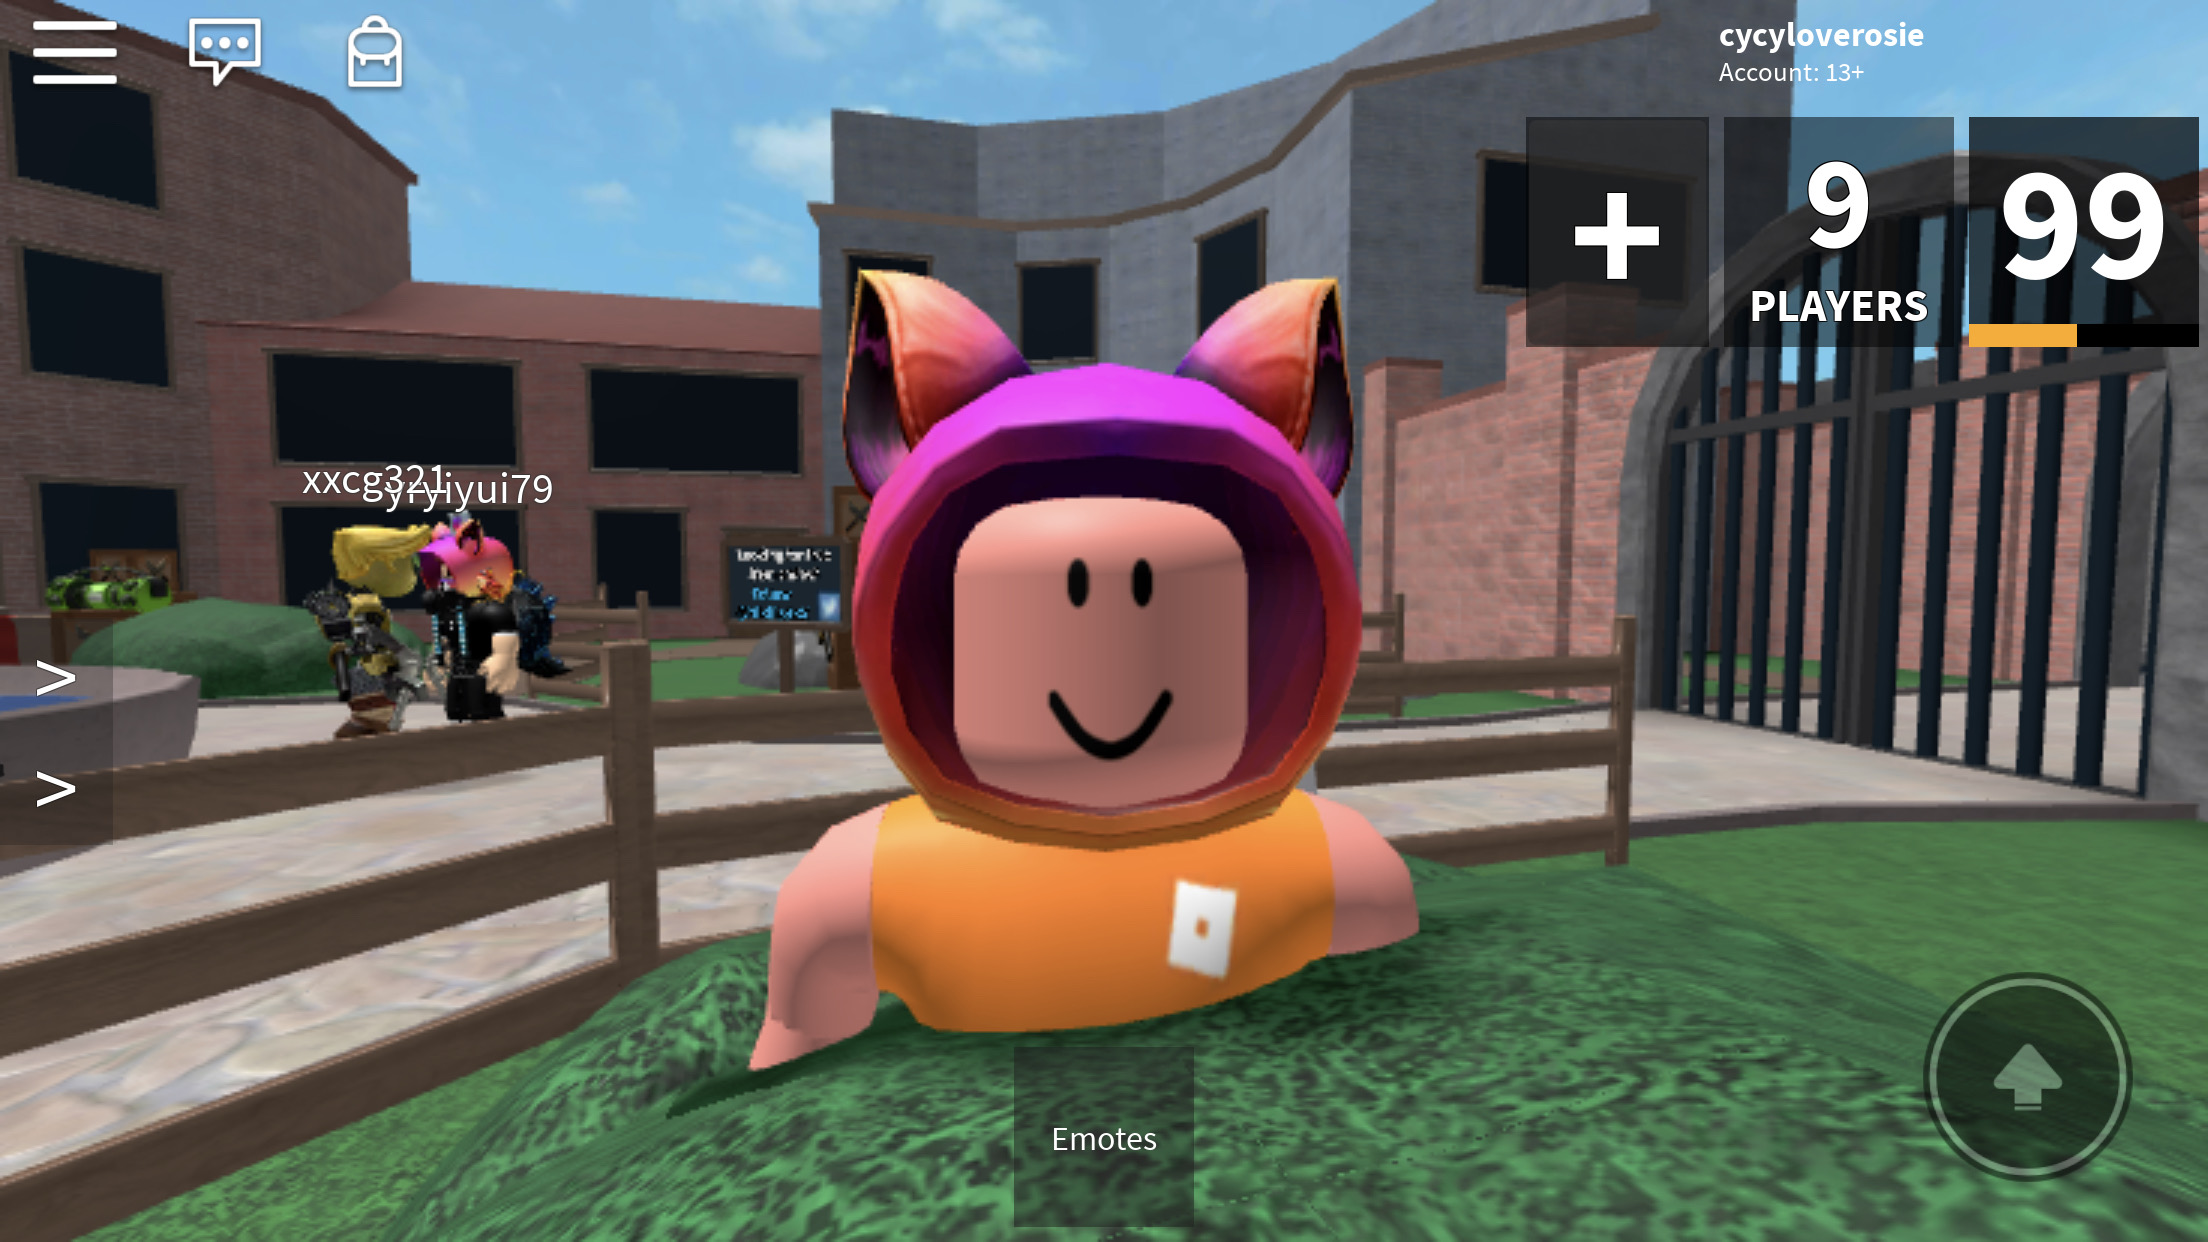 Freetoedit Roblox Image By Hiding Away This World